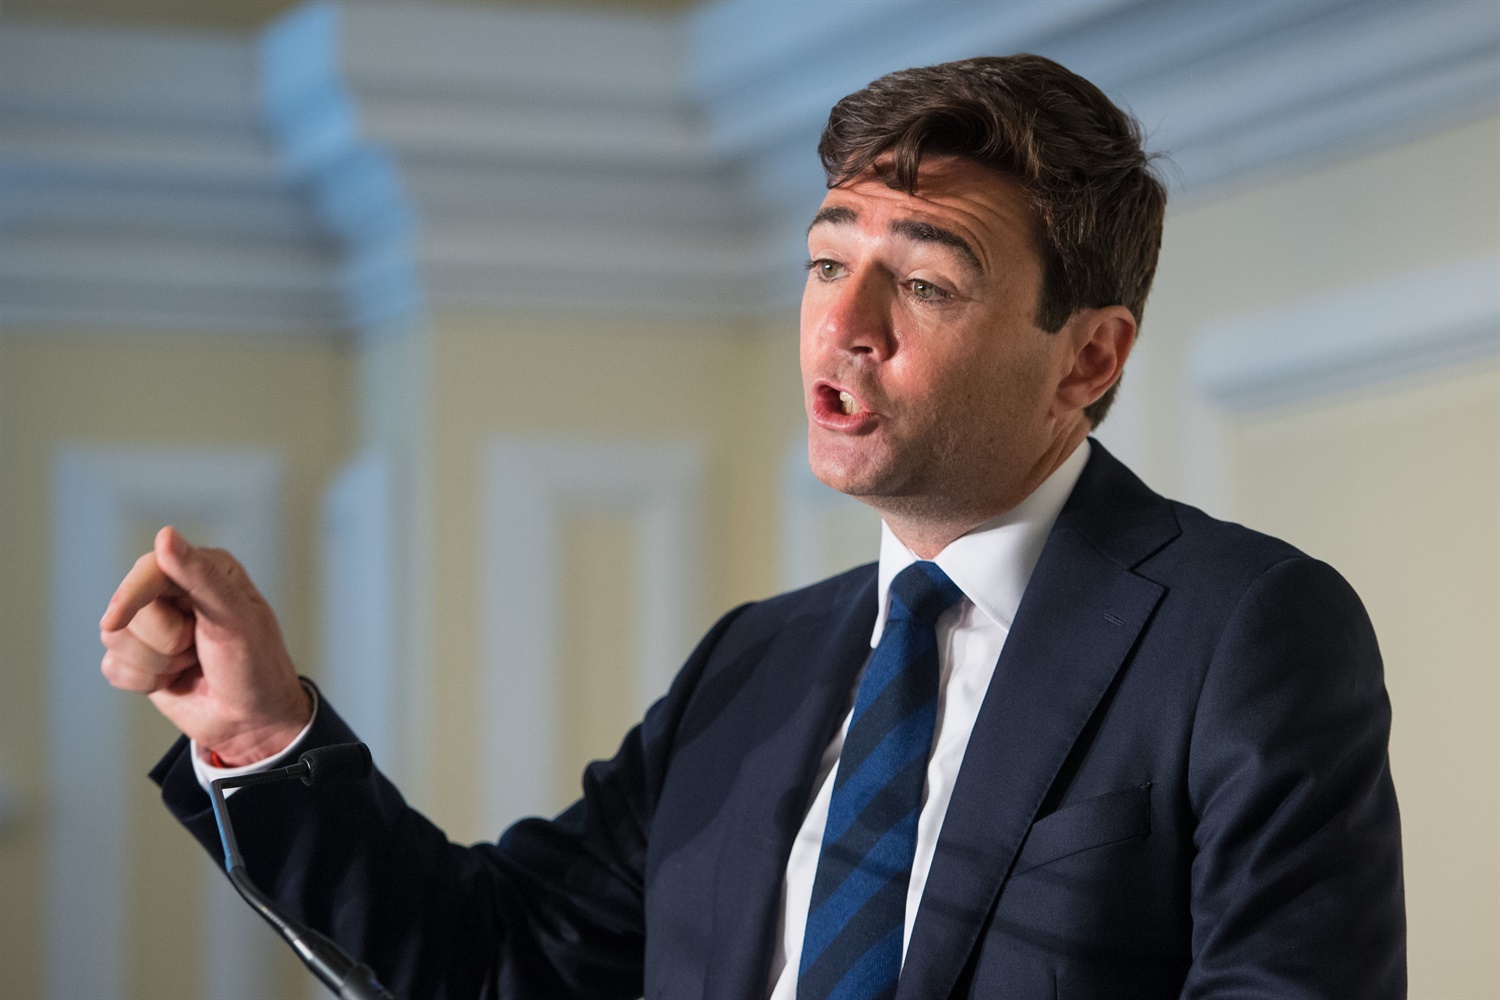 Exclusive: Shutting door to nationalisation ‘fetters’ rail review and constrains expert advice, says Burnham